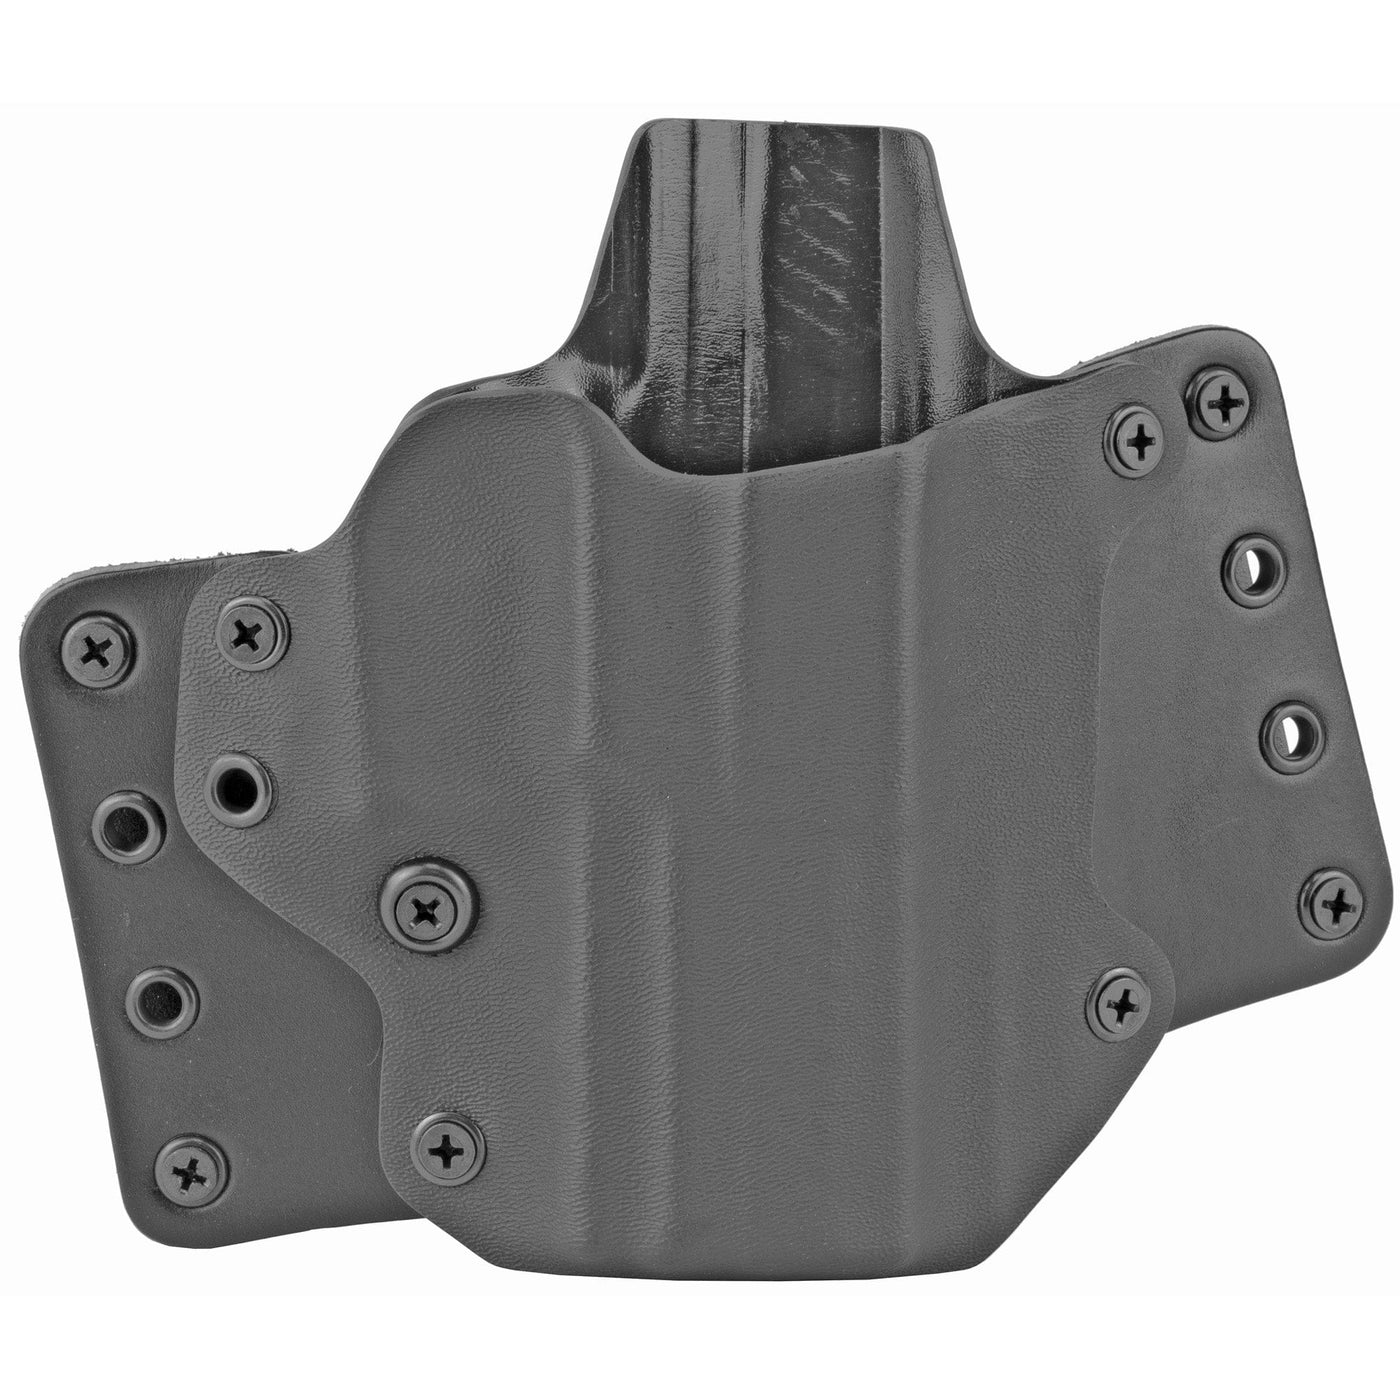 BlackPoint Tactical Blk Pnt Lthr Wing P320 X-carry Rh Bk Holsters